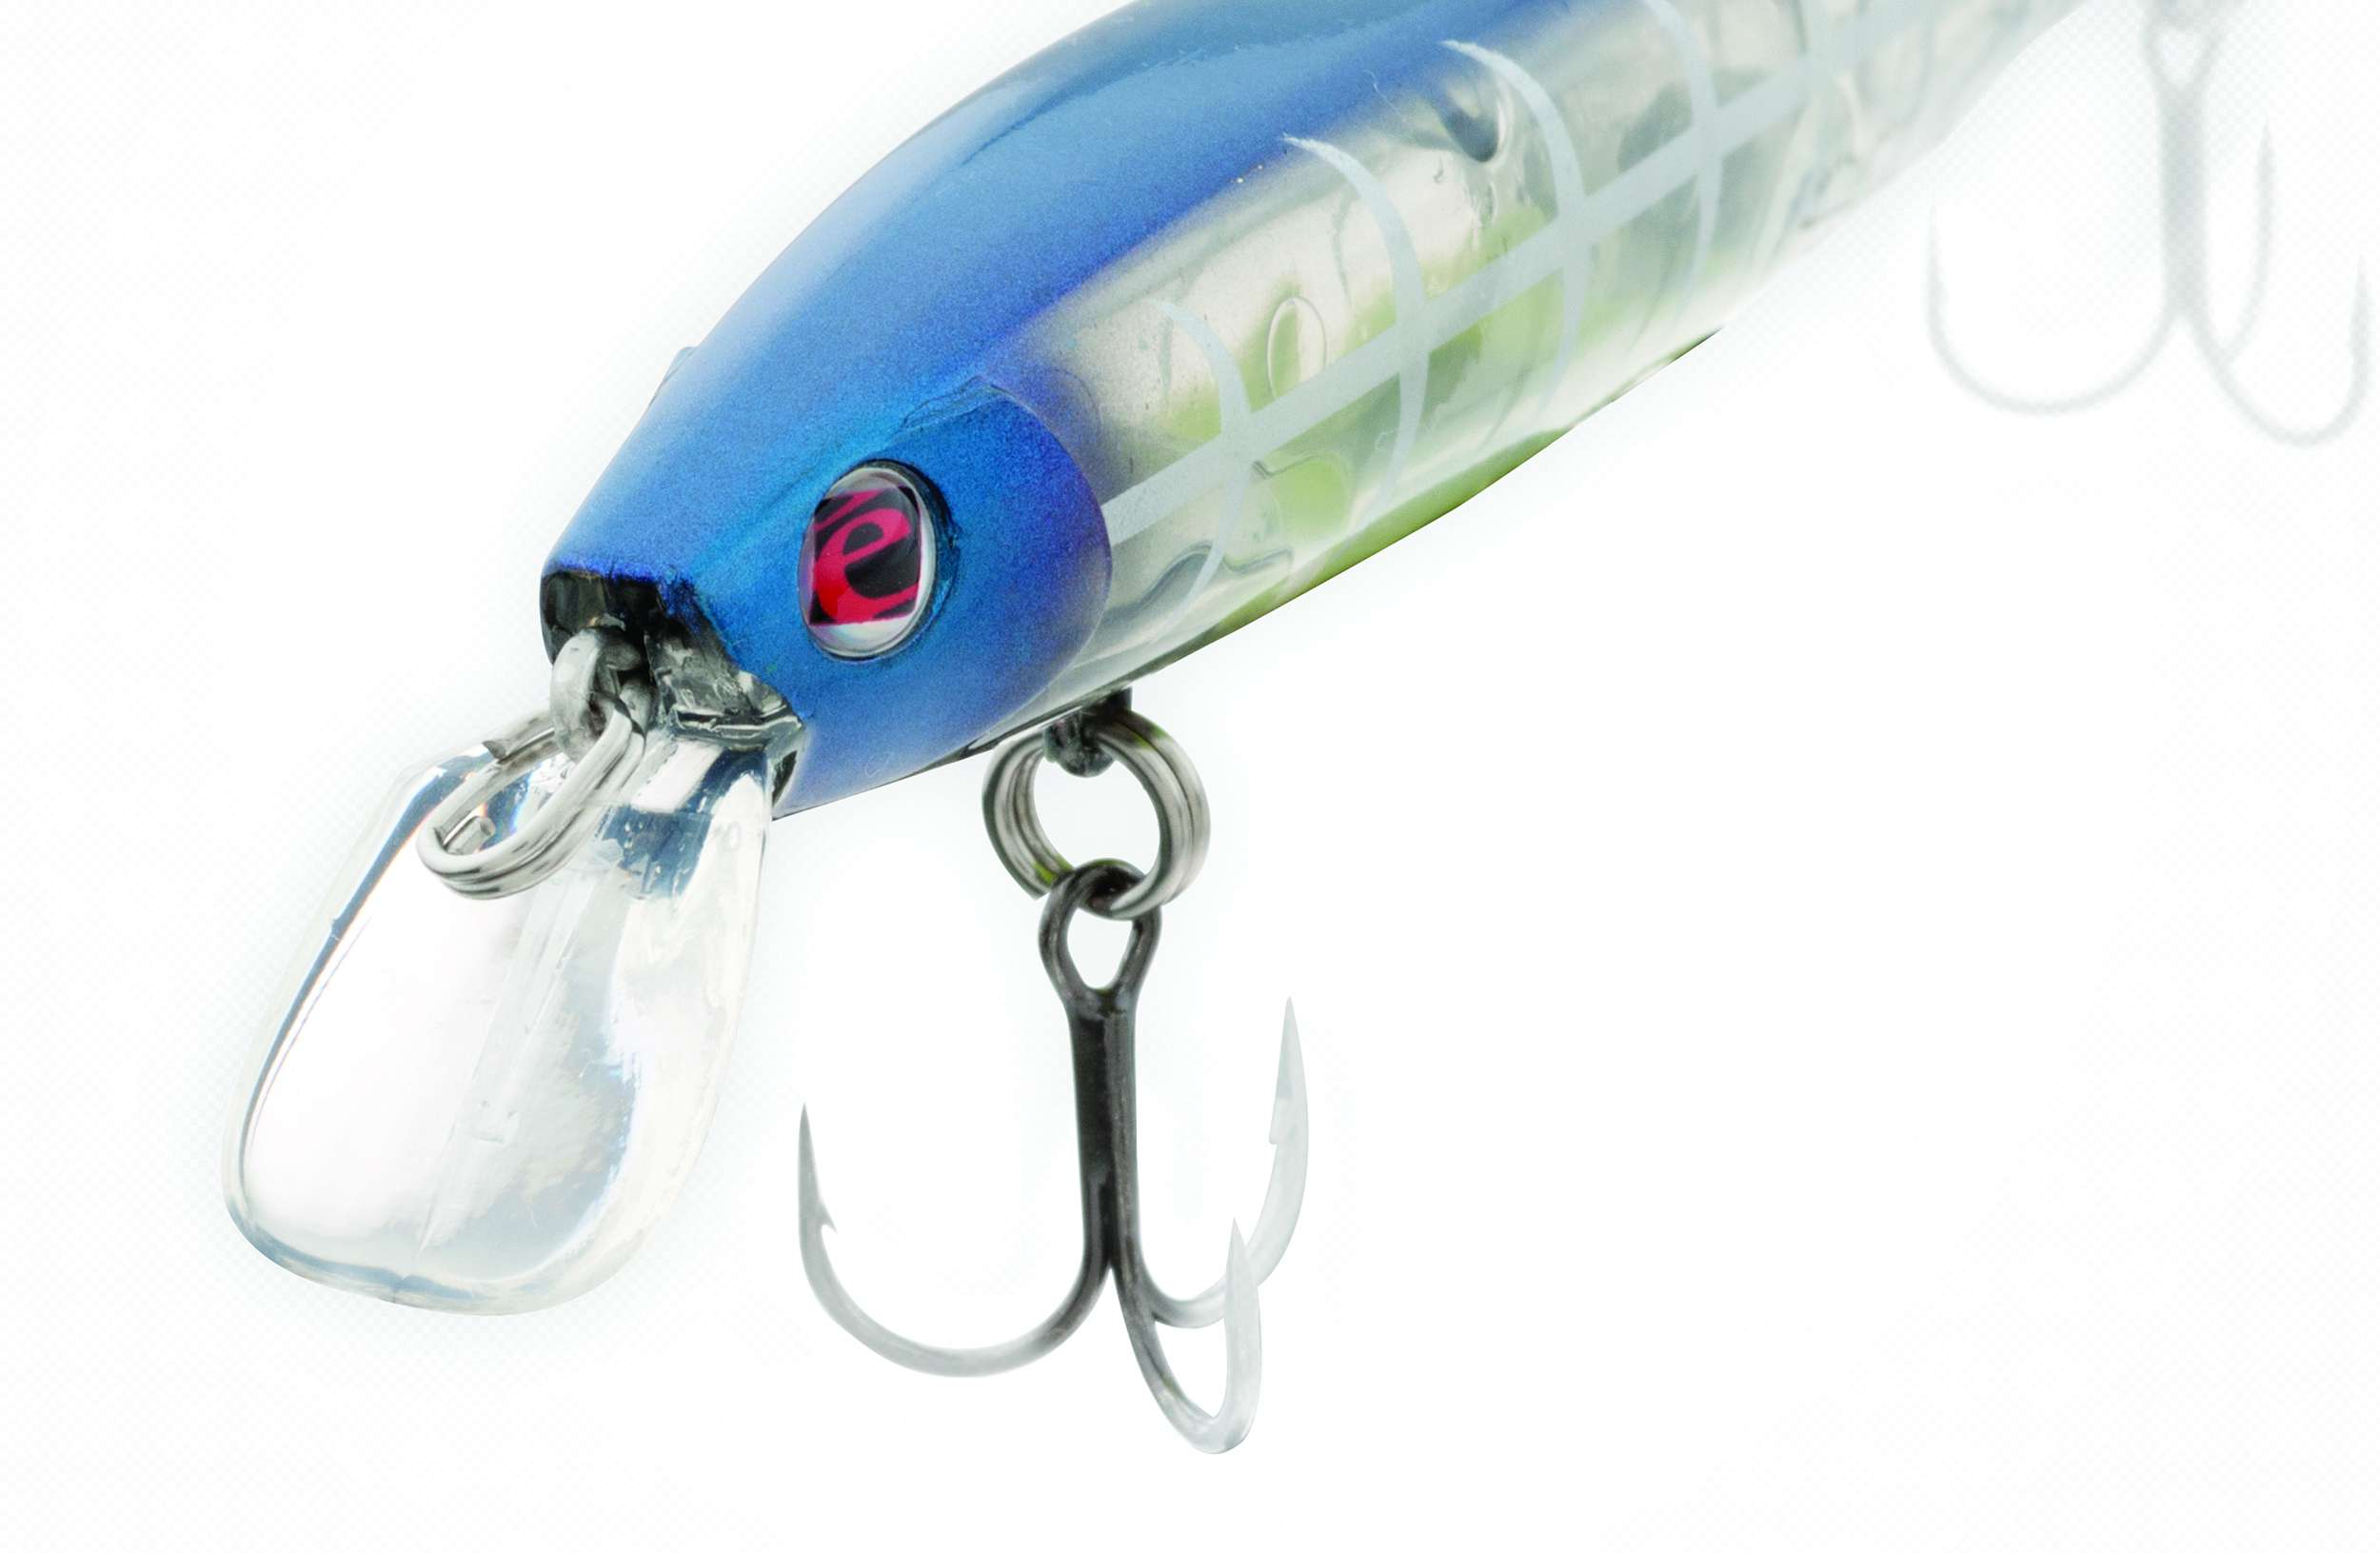 Also from the Action First line is the Star Shiner, a hybrid jerkbait/crankbait that can be fished fast for a power presentation or twitched slowly in cold water like a jerkbait.